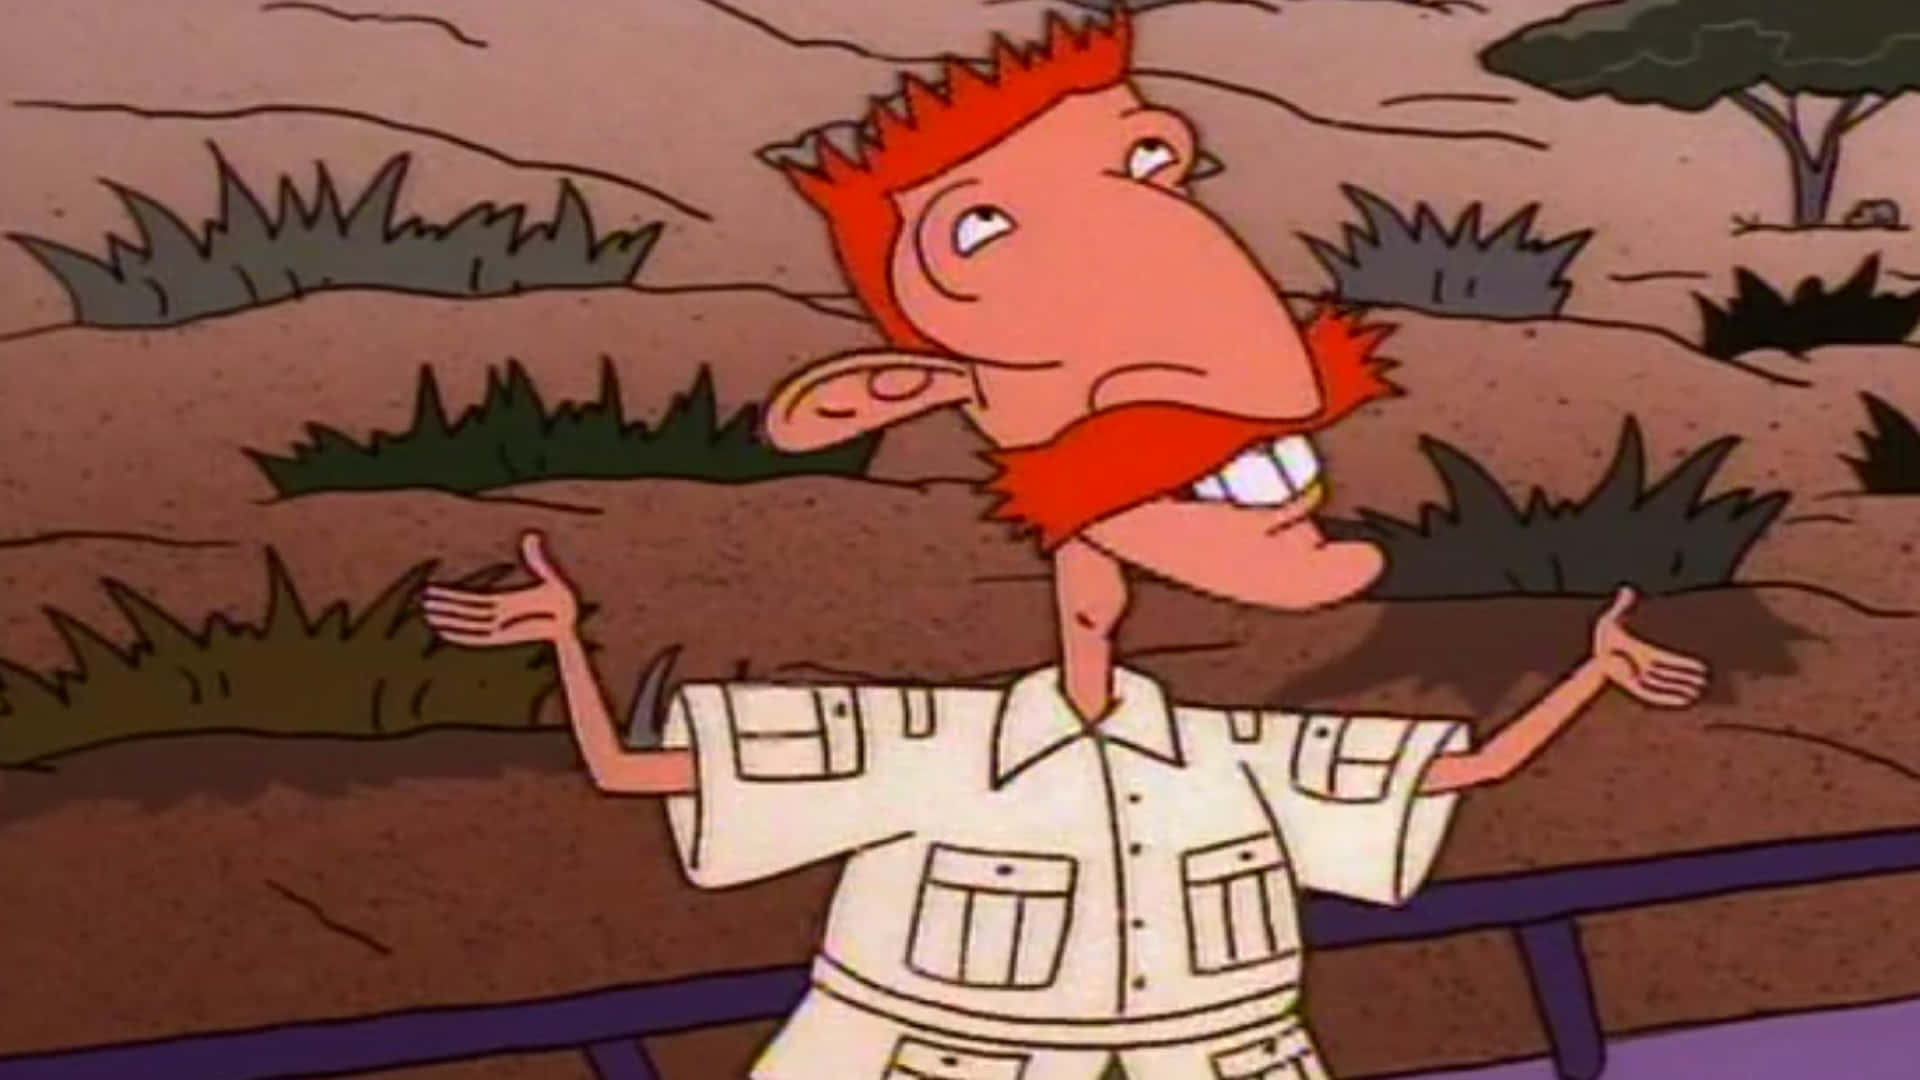 Caption: Animated Character Nigel Thornberry from The Wild Thornberrys Animated Series Wallpaper